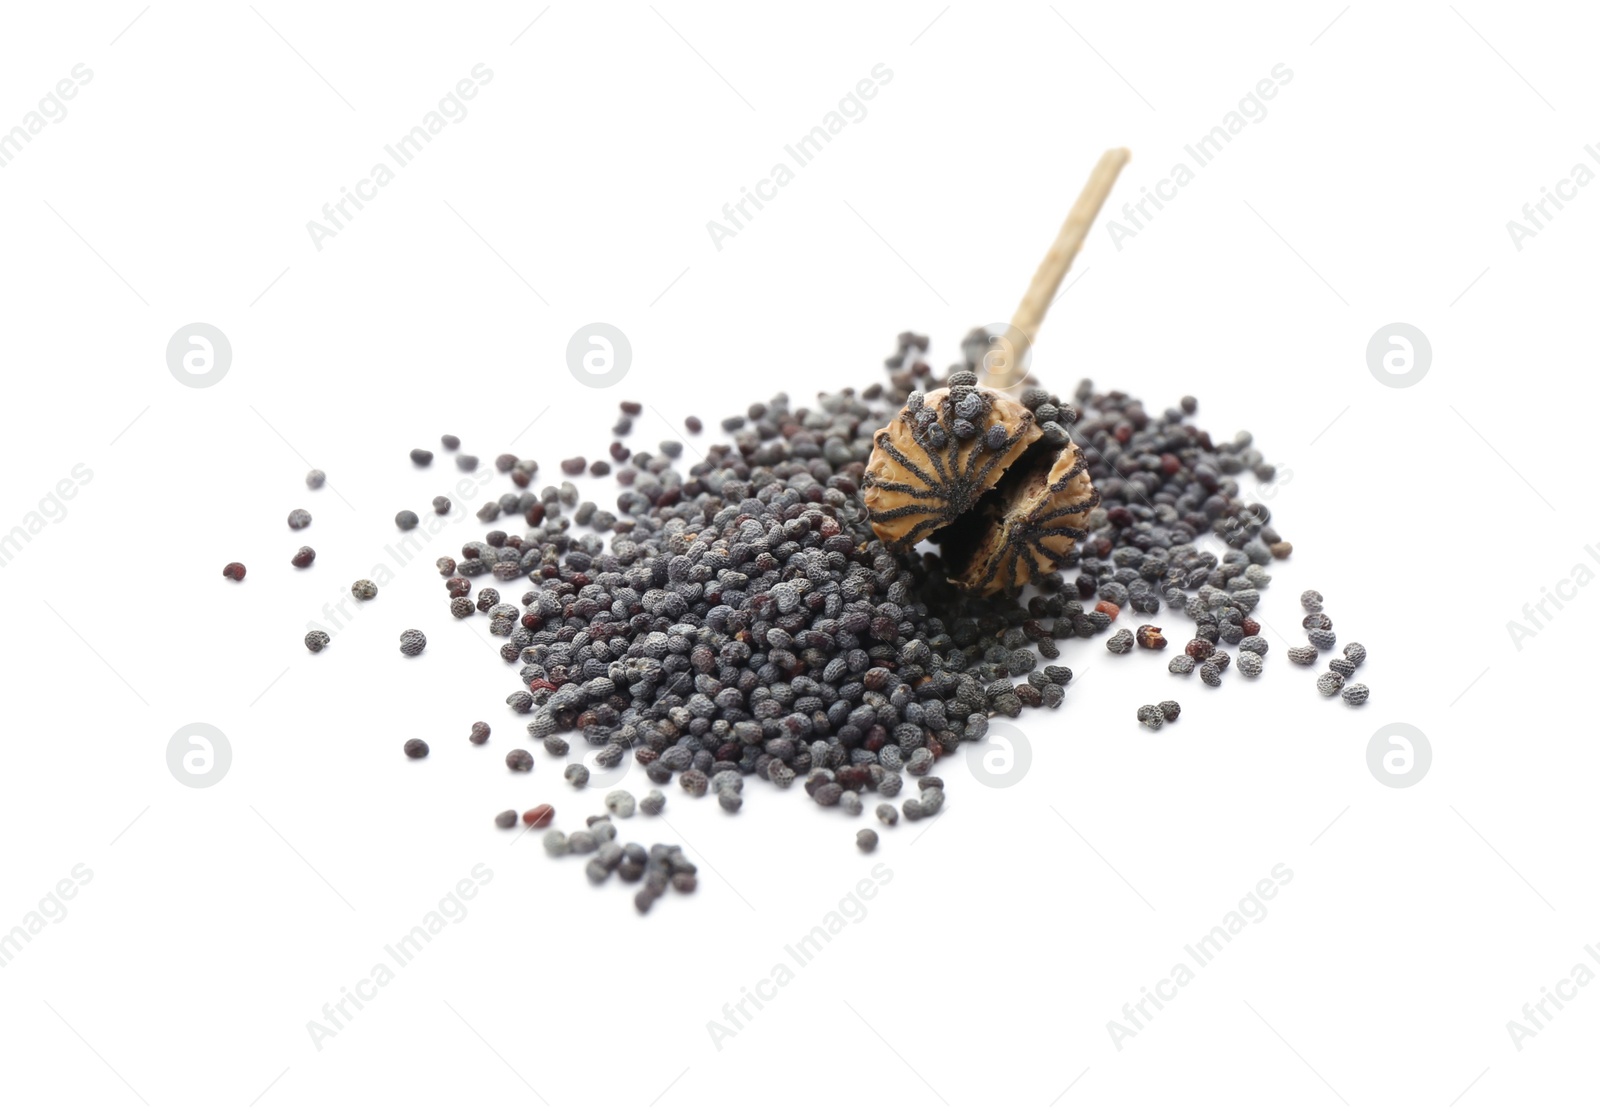 Photo of Dried poppyhead and seeds on white background